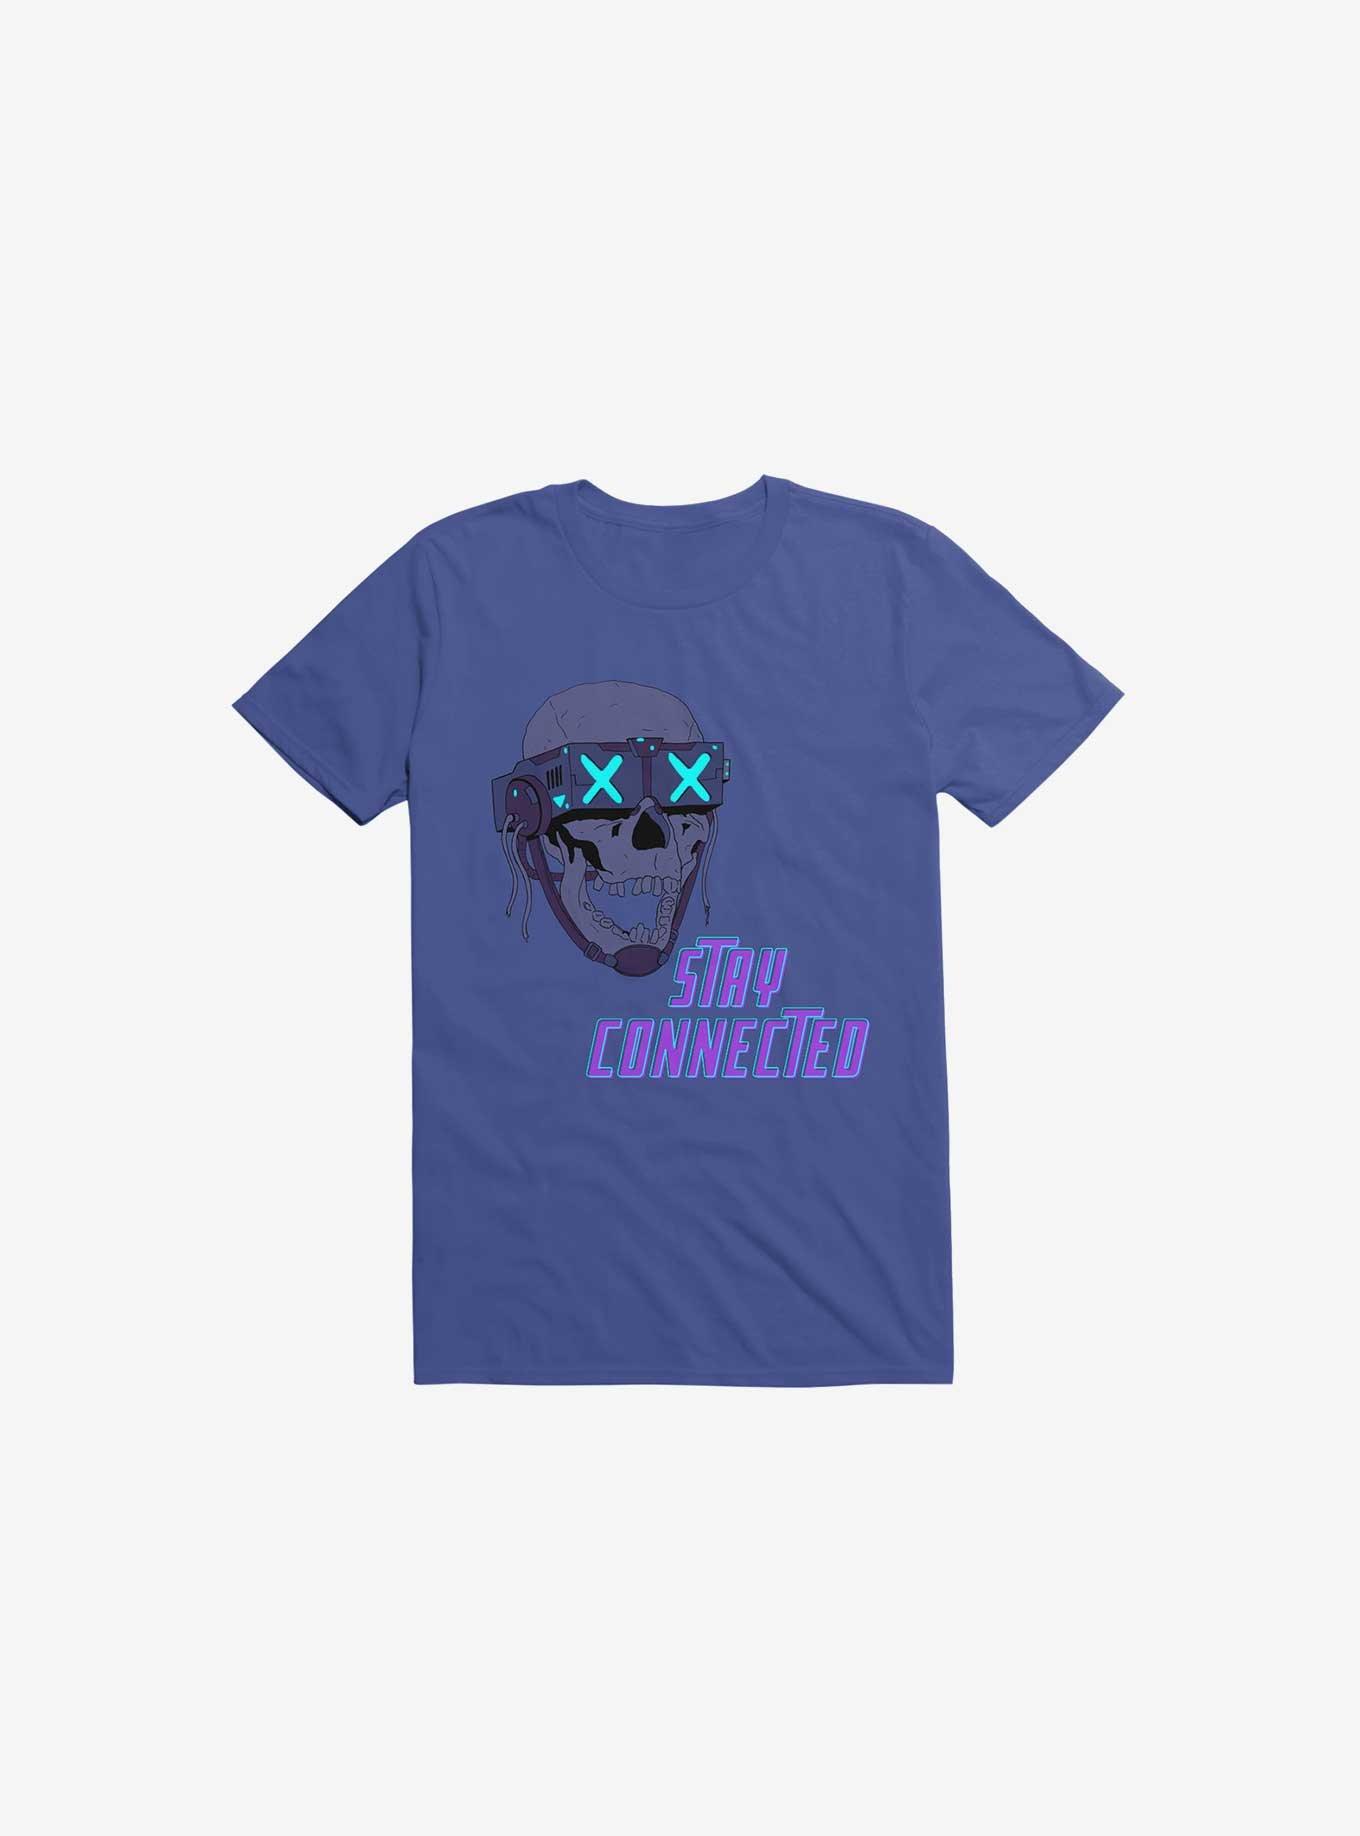 Stay_Connected 2.0 Royal Blue T-Shirt